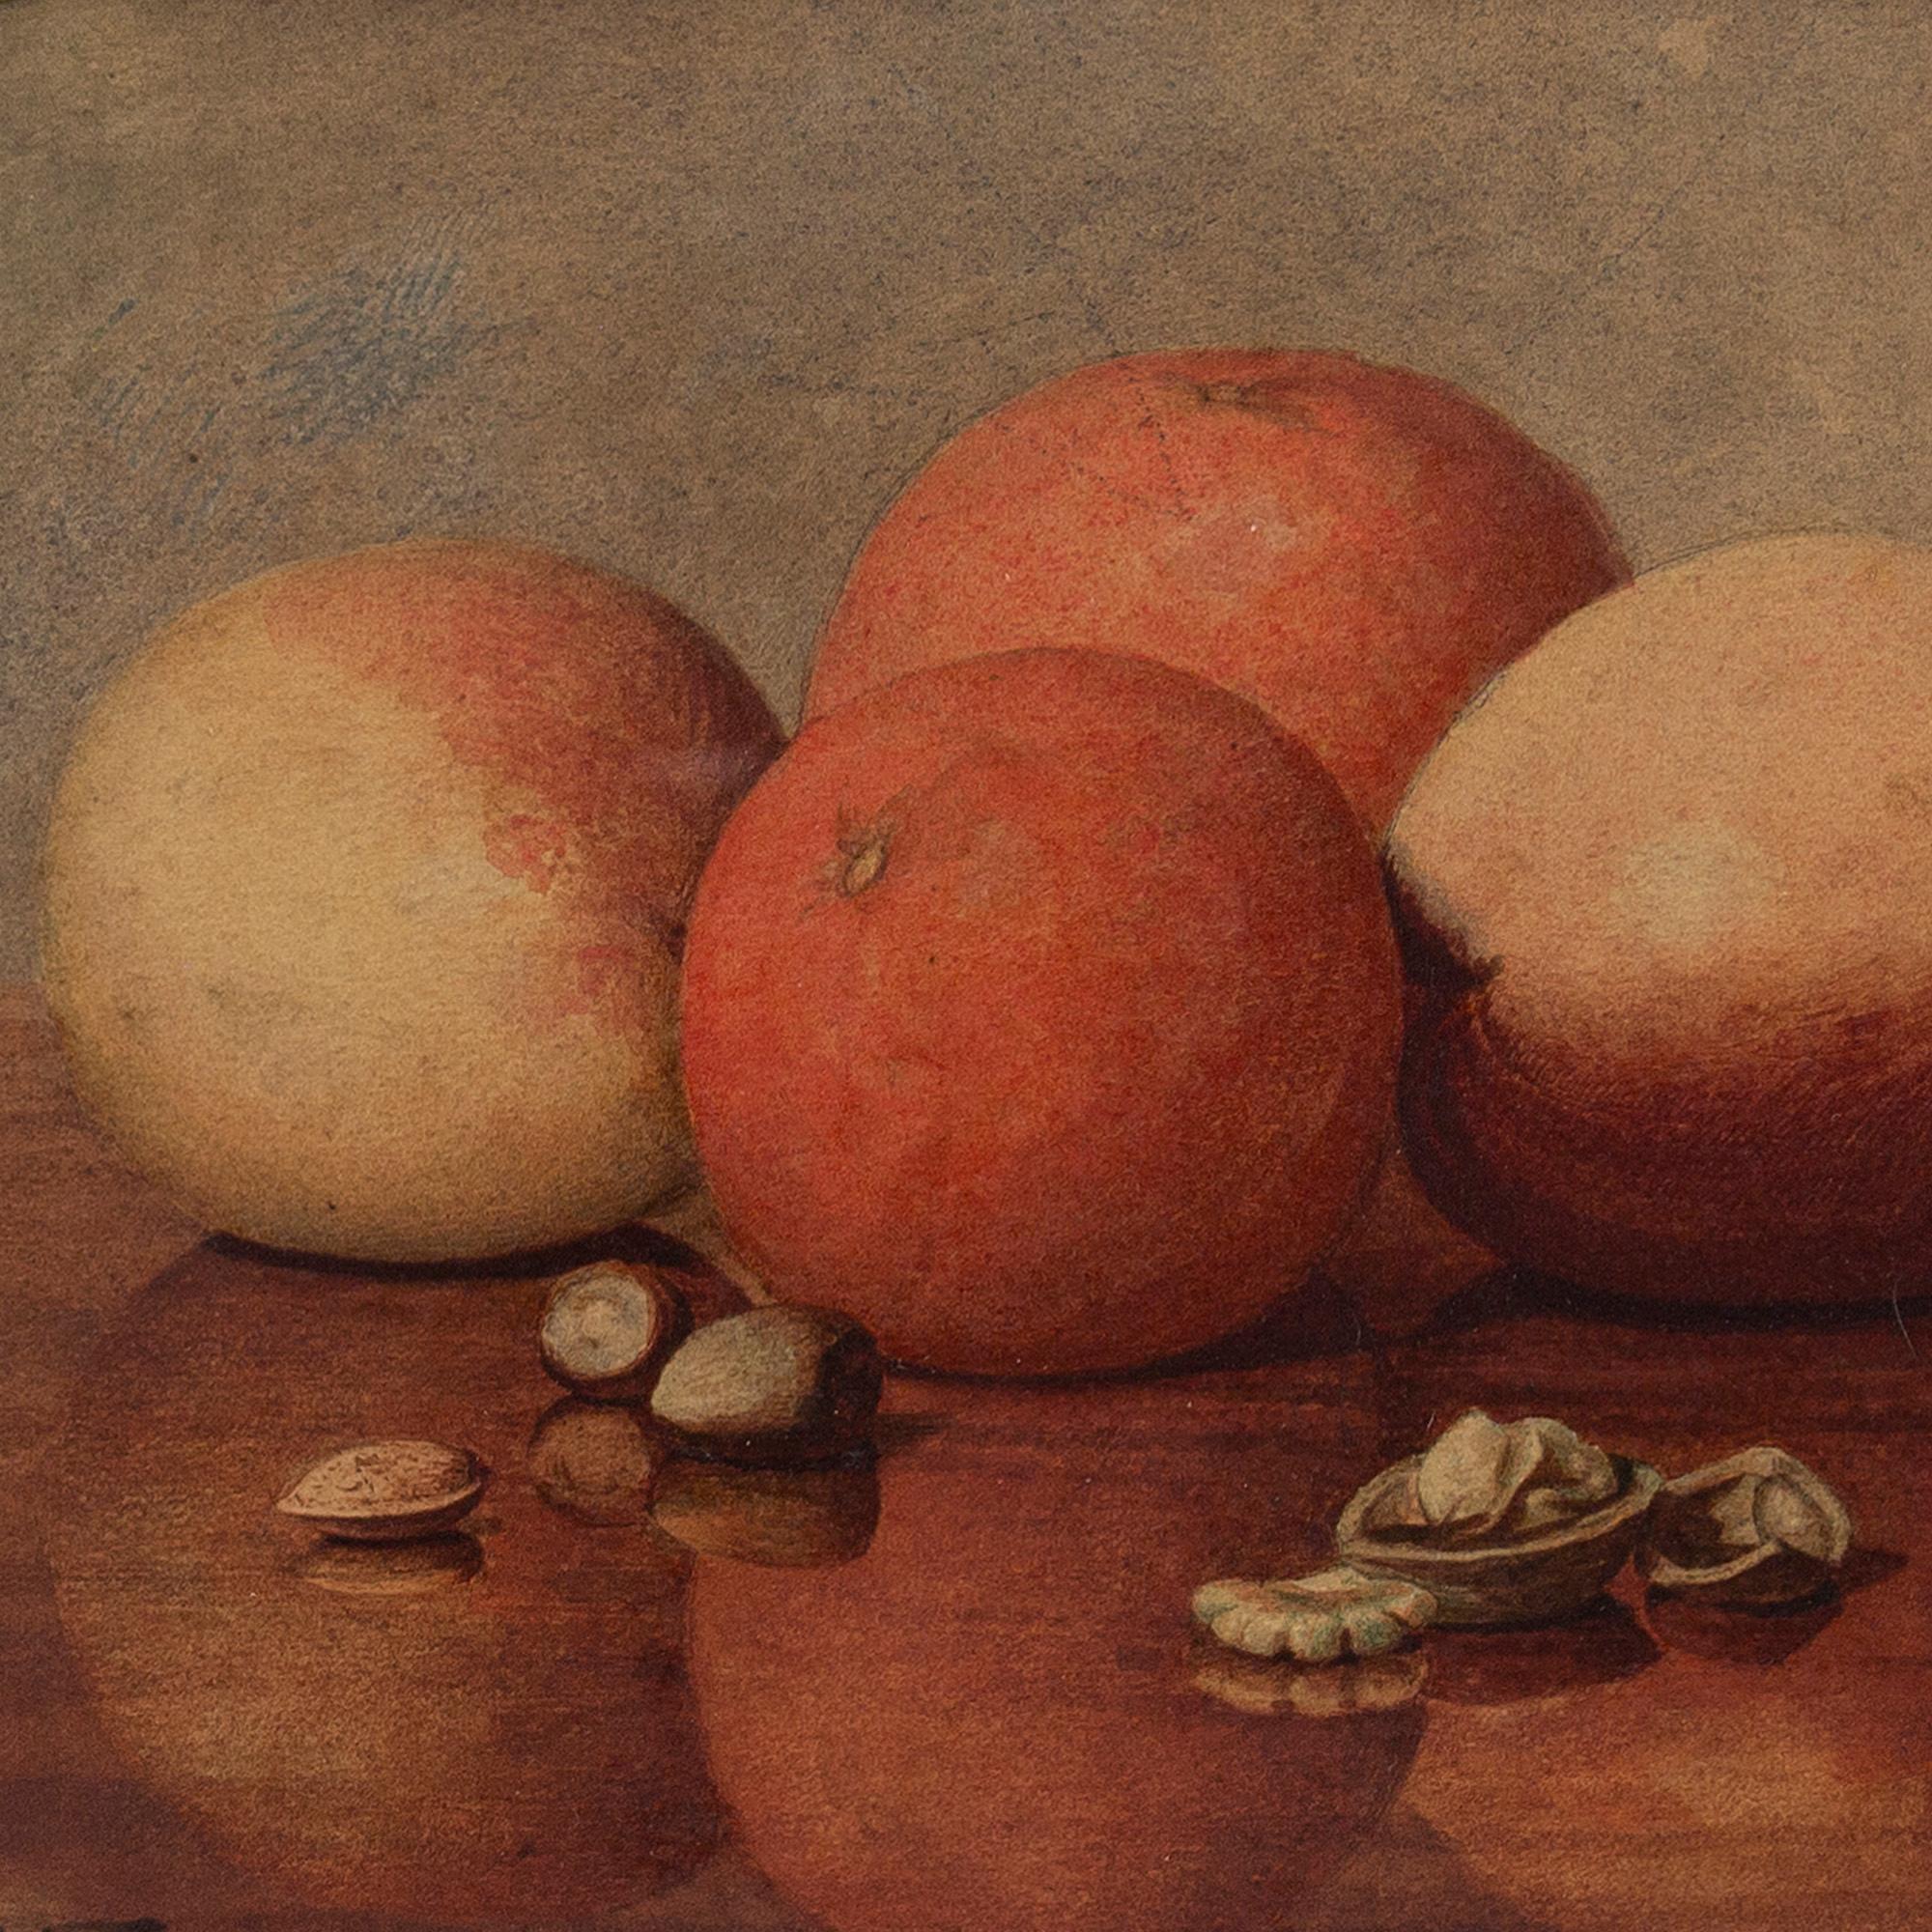 This stylish late 19th-century still life by W Erich Taefflinger depicts an arrangement of oranges, apples and nuts. It’s a refined work with an emphasis on form and reflection.

The artwork is housed within an early 20th-century frame, which